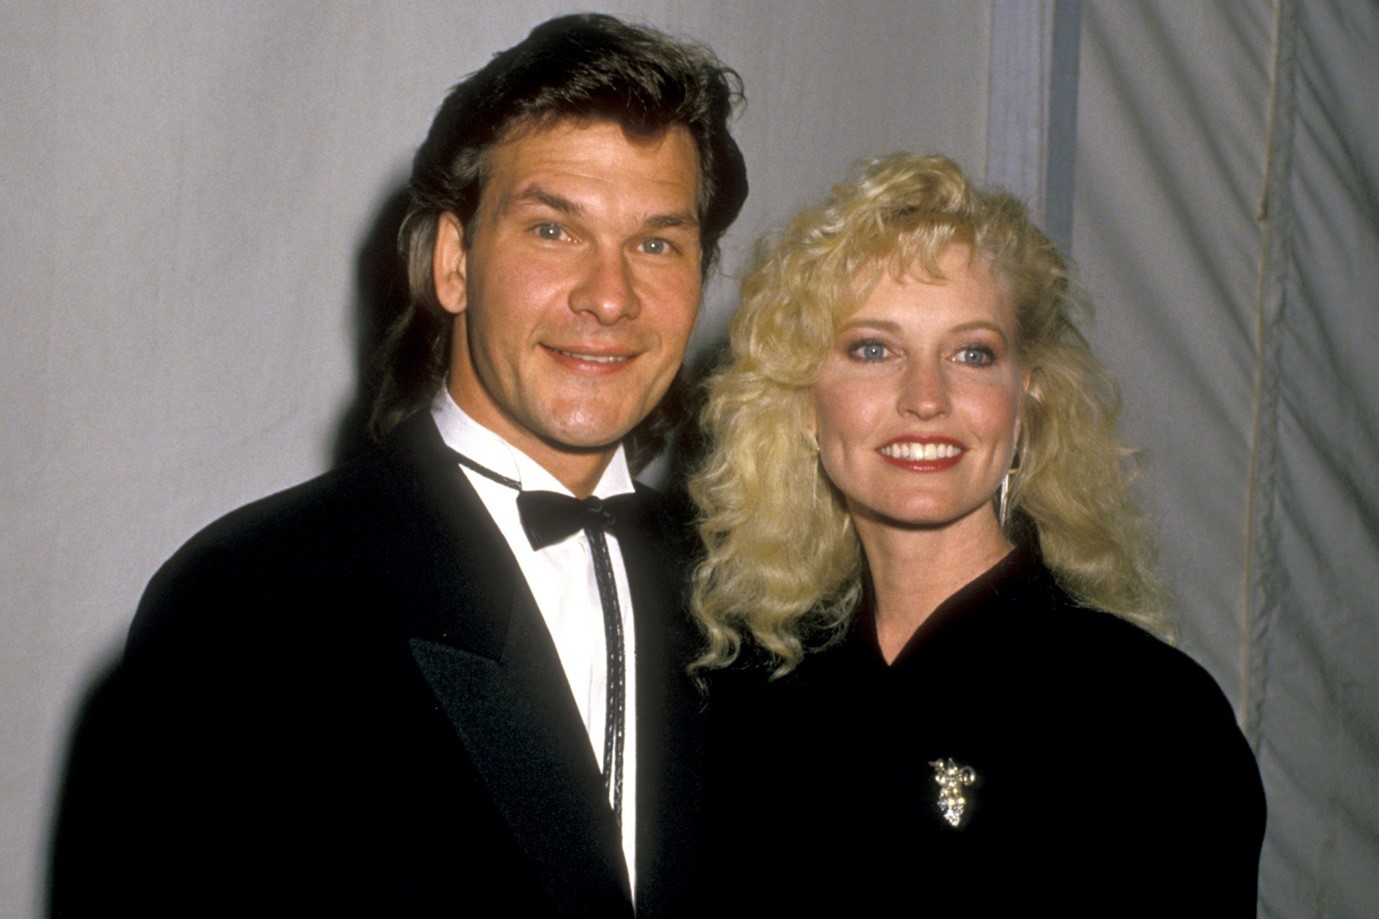 Lisa Niemi and Patrick Swayze during their marriage.